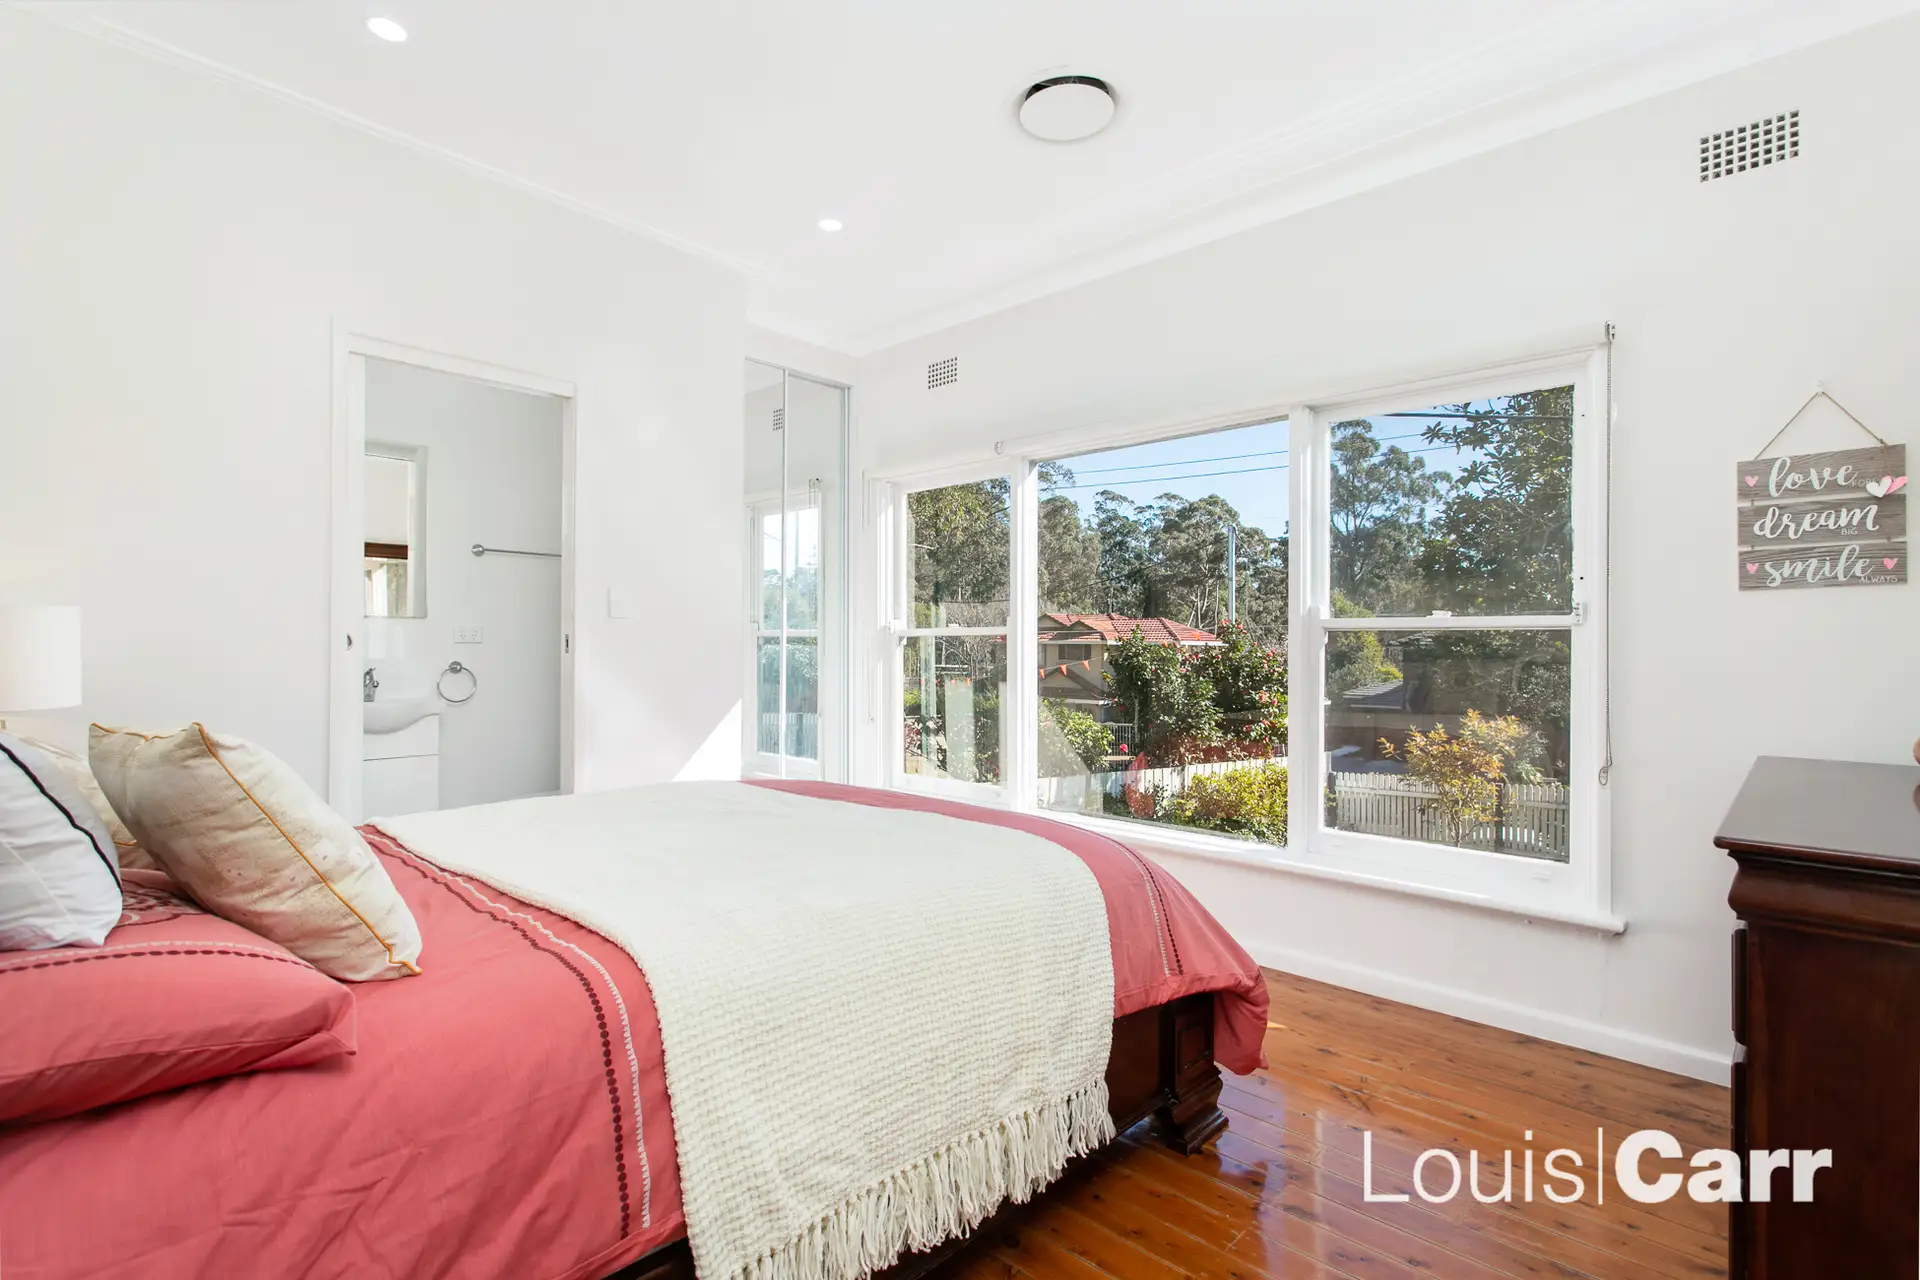 Photo #7: 103 Victoria Road, West Pennant Hills - Sold by Louis Carr Real Estate